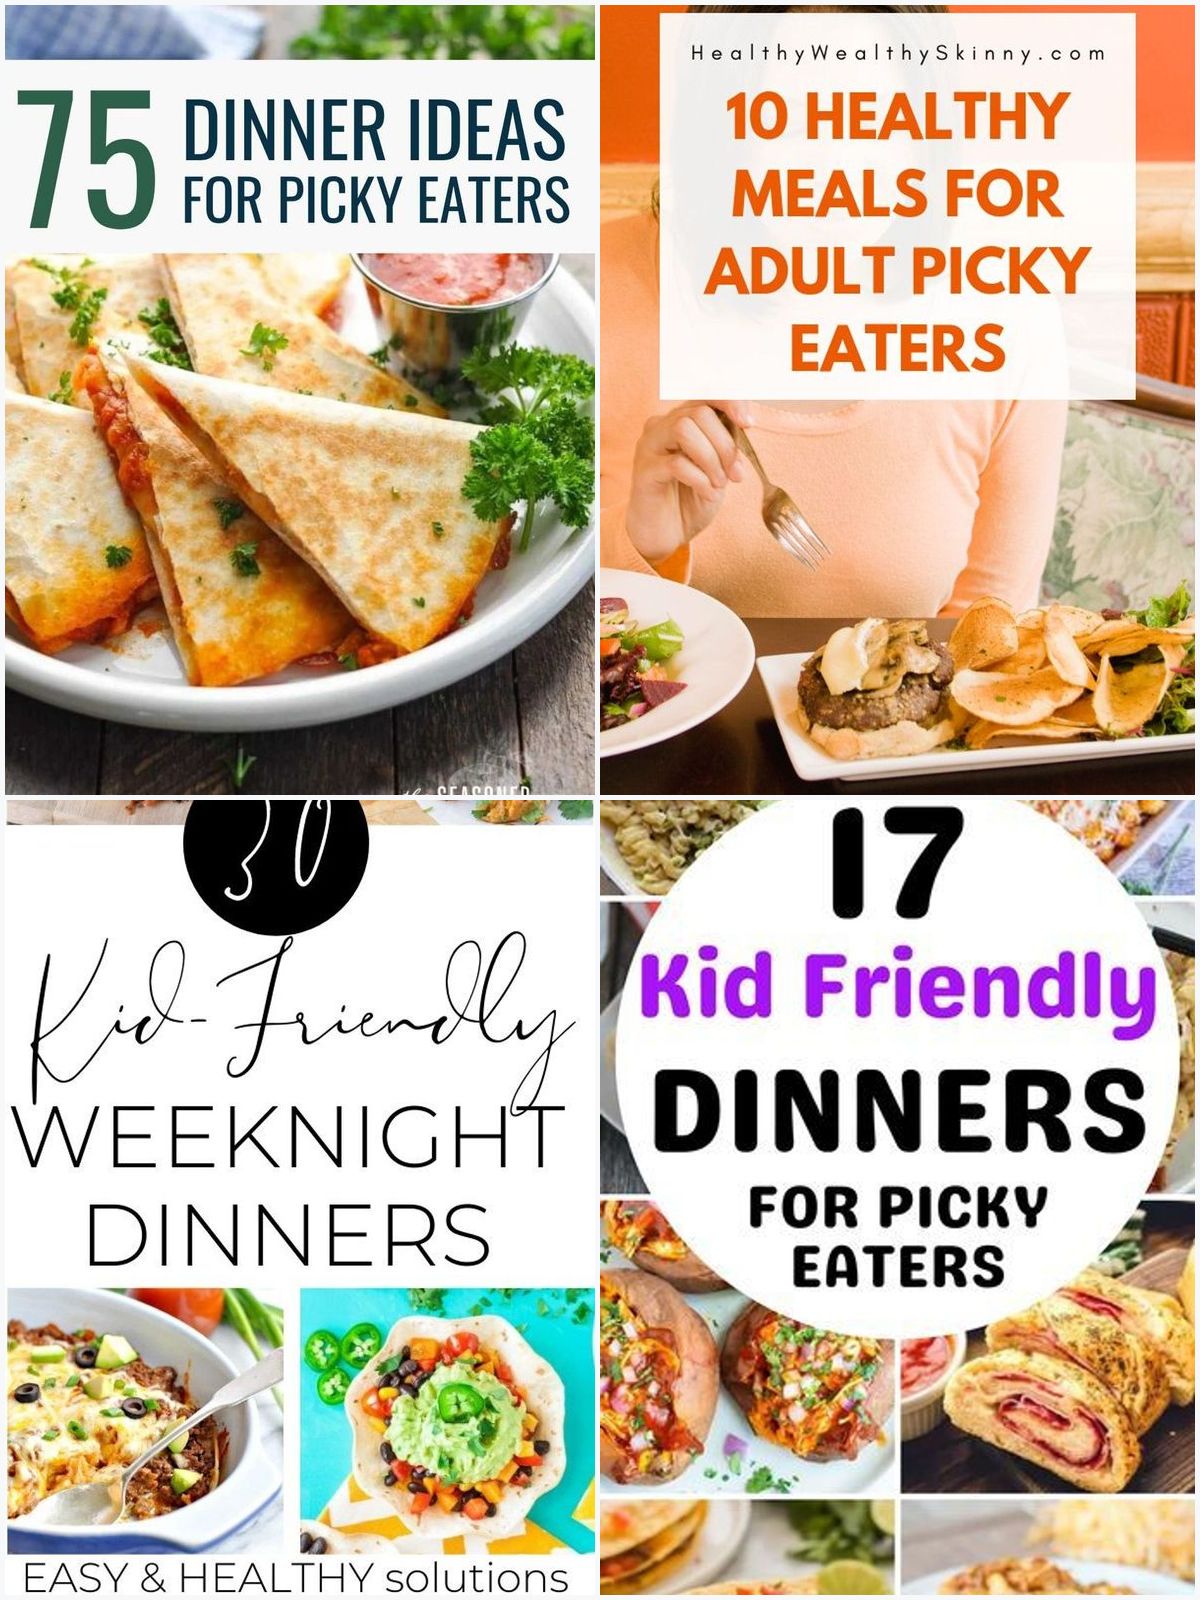 My favorite ideas for healthy dinner ideas picky eaters